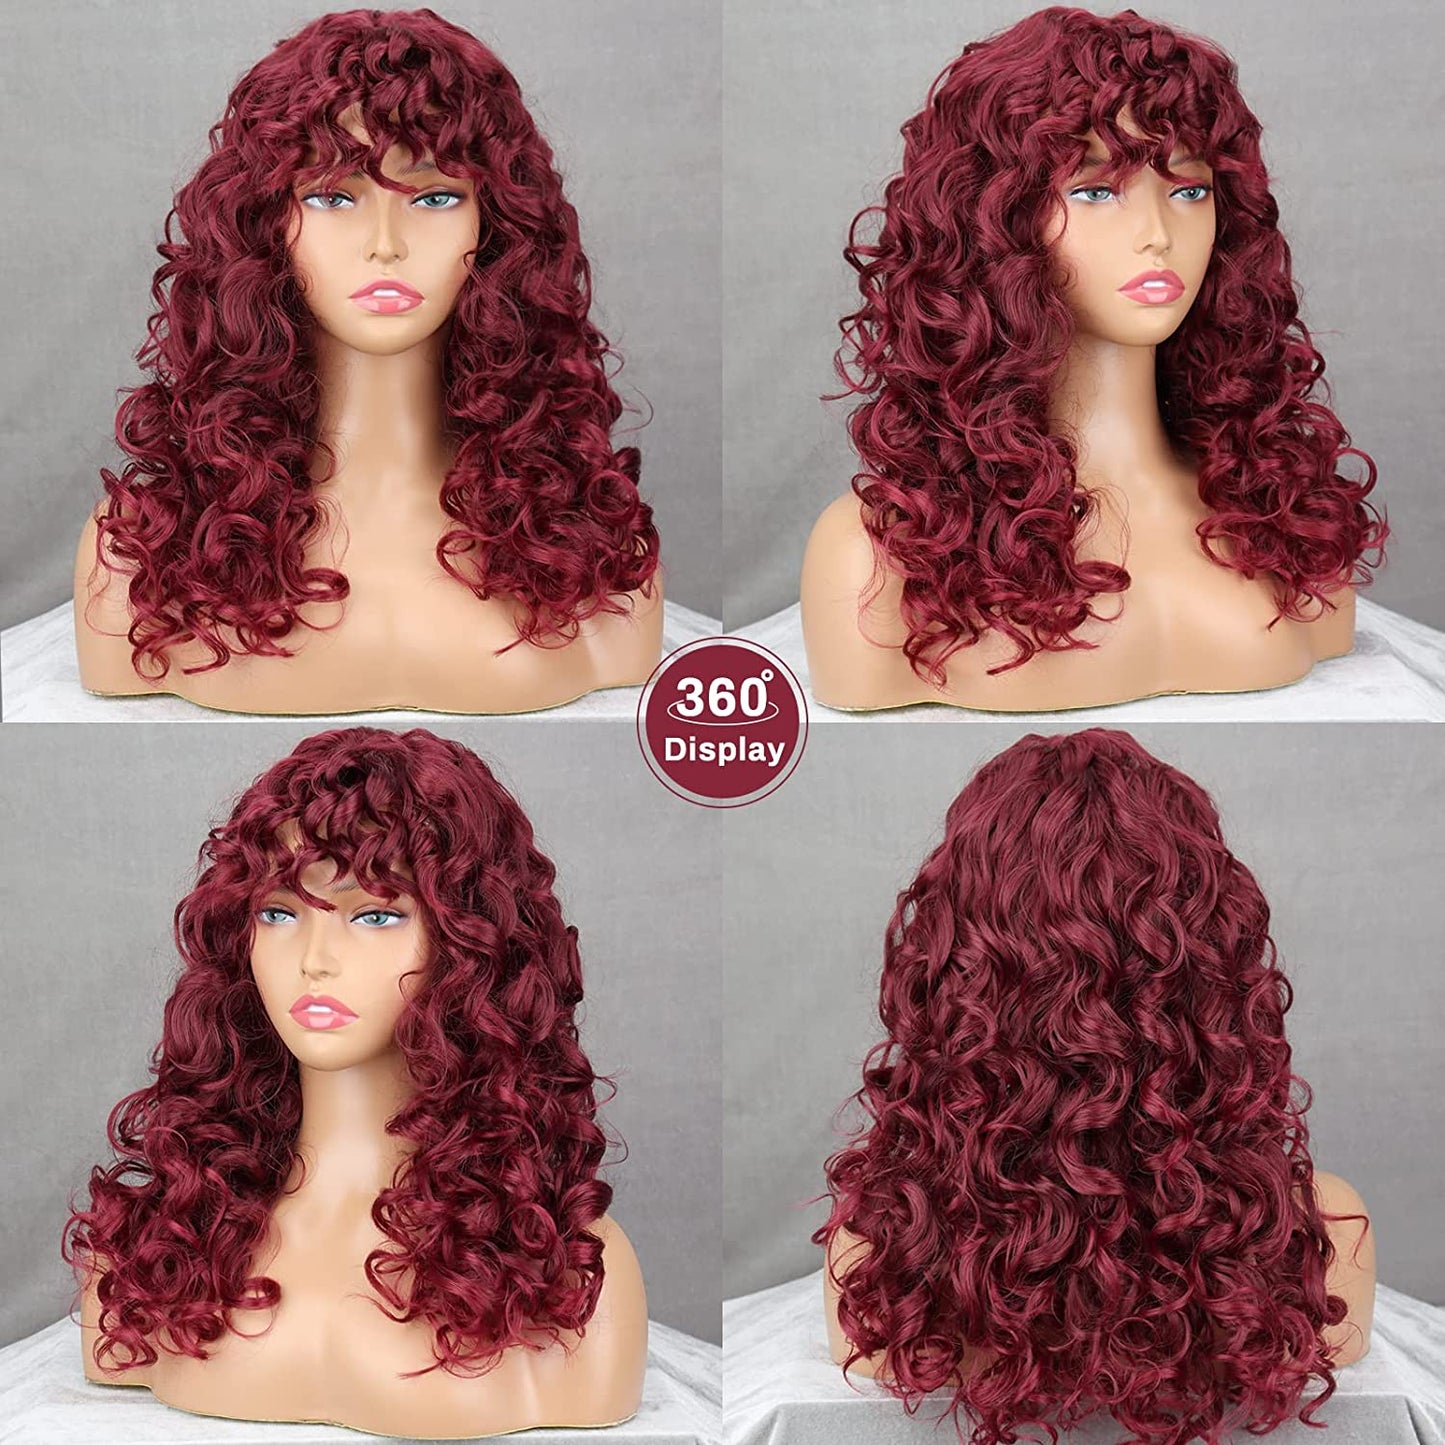 Long Red Curly Afro Wigs for Black Women, Fluffy Wavy Wine Wig with Bangs, Afro Kinky Curly Big Bouncy Wig